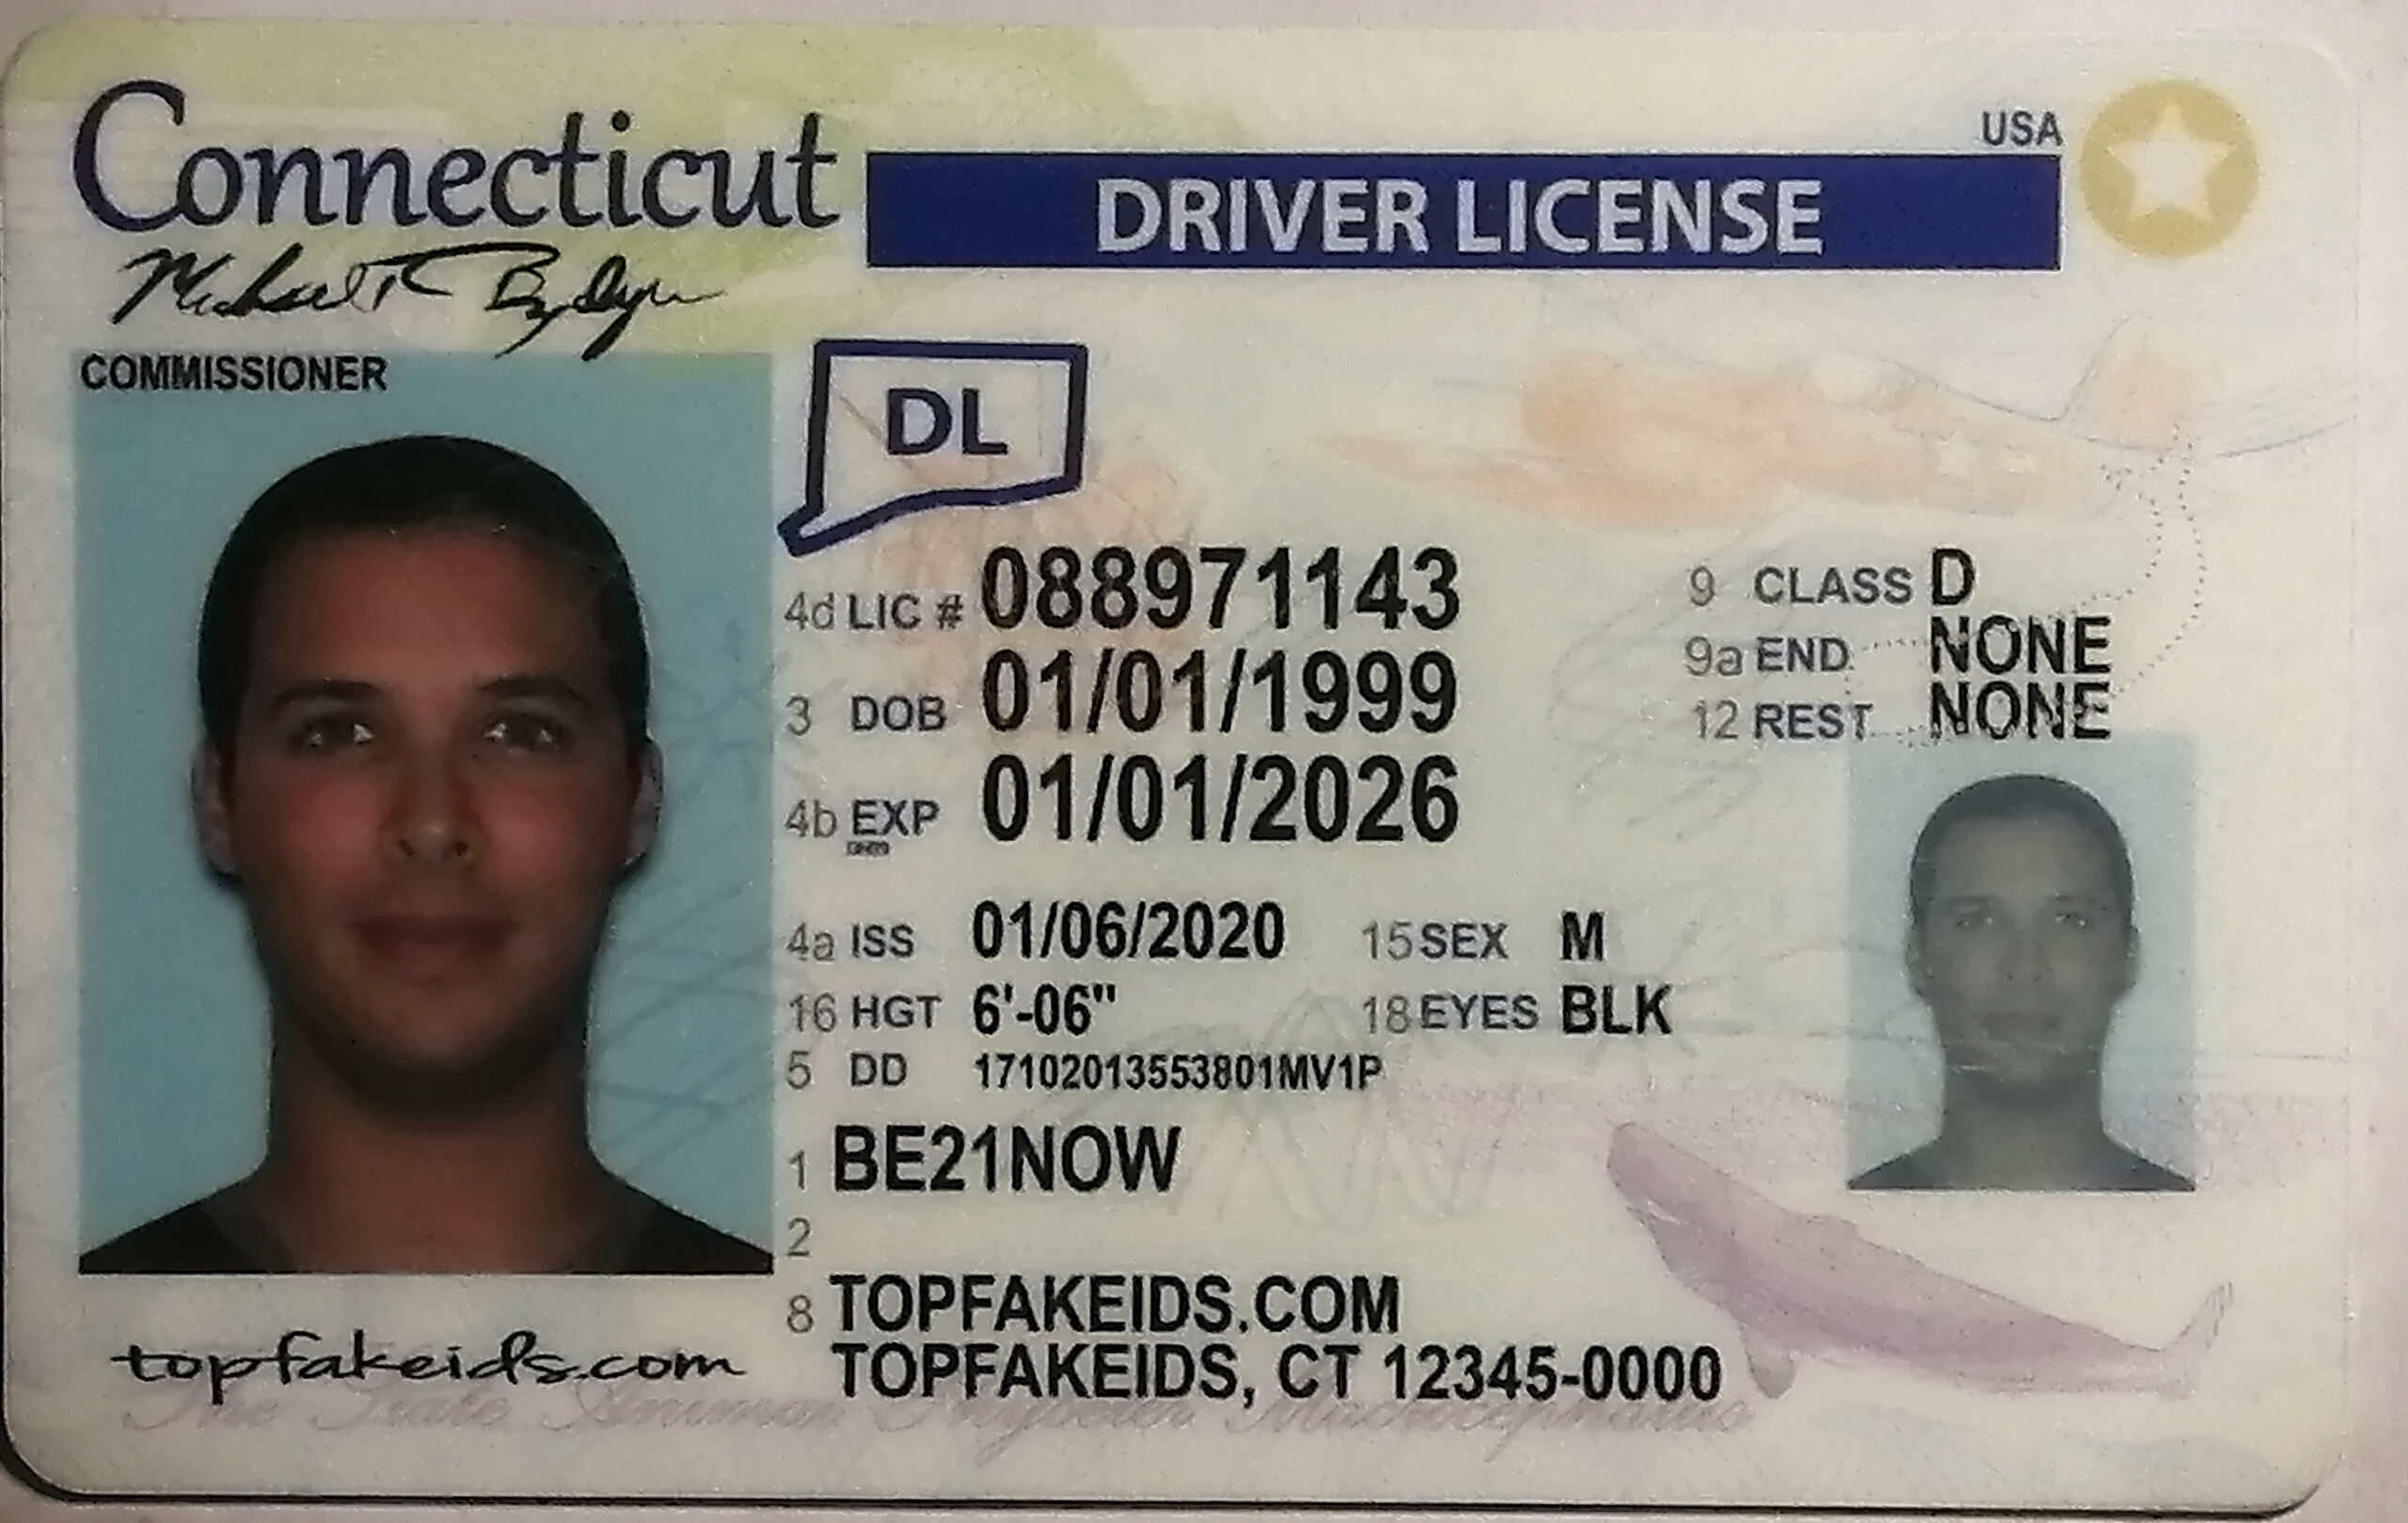 Get the Most Out of Fake IDs with Responsible Use - Top Fake IDs